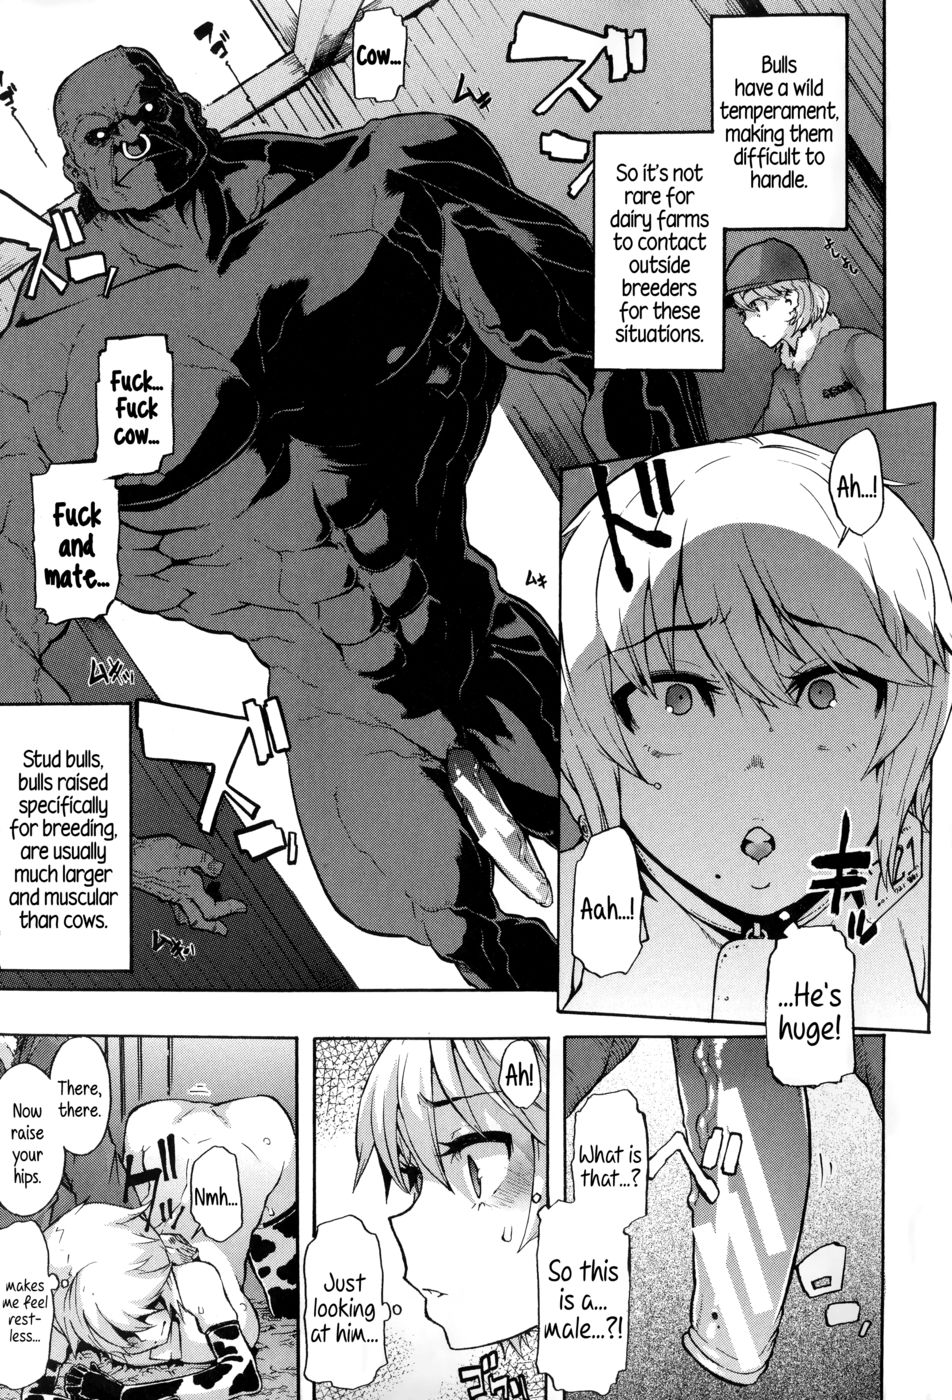 Nude Cow Hentai - A dairy cow's life-Read-Hentai Manga Hentai Comic - Page: 9 - Online porn  video at mobile